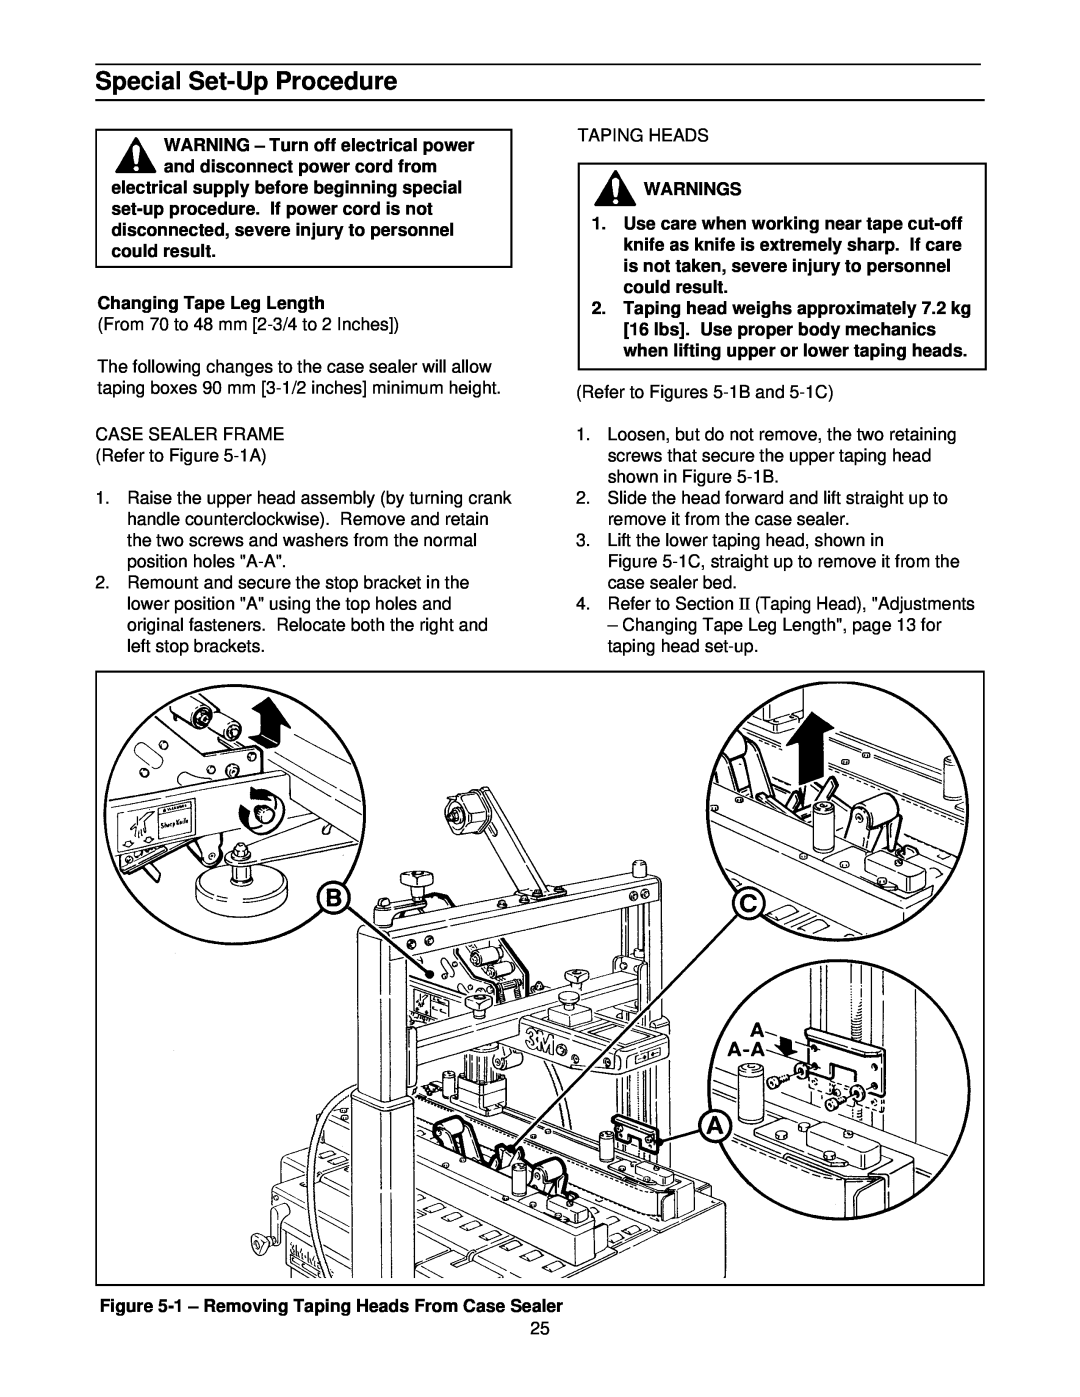 3M 39600 manual Special Set-Up Procedure, WARNING - Turn off electrical power and disconnect power cord from, Warnings 